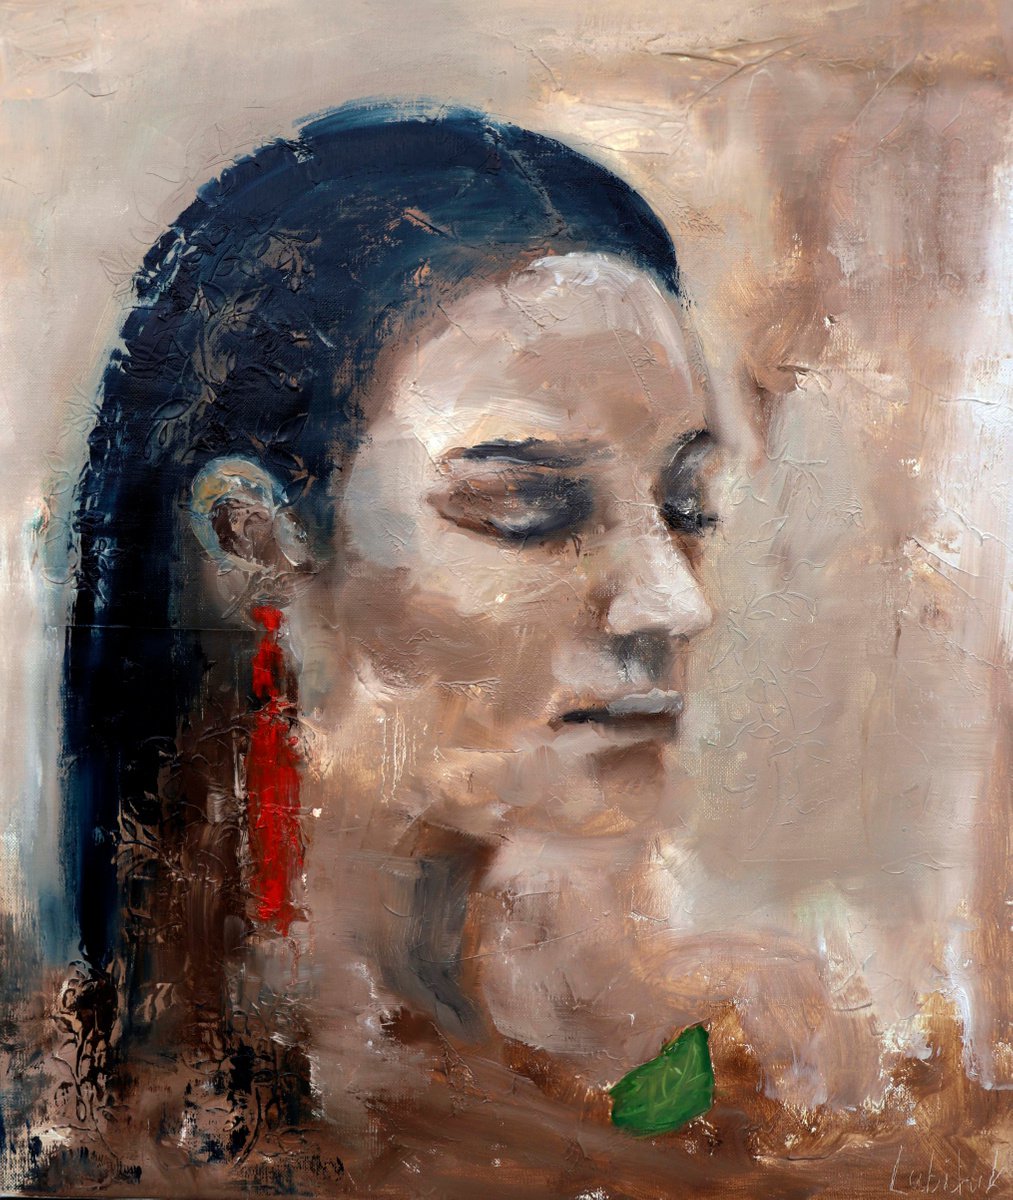 Woman Portrait painting Original on Canvas Modern Abstract by Anna Lubchik